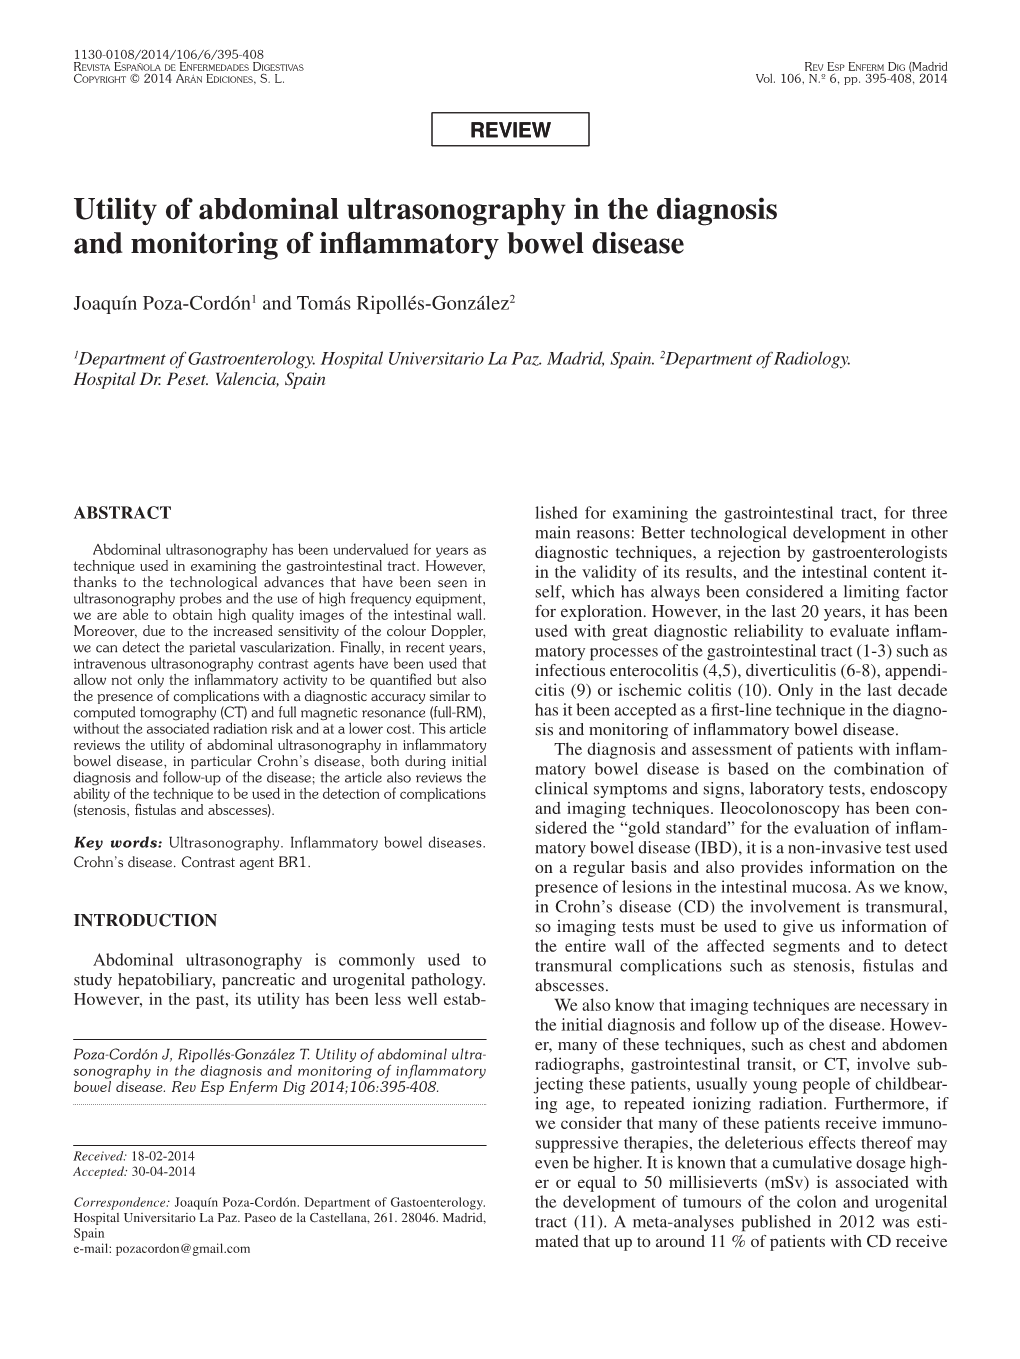 Utility Of Abdominal Ultrasonography In The Diagnosis And Monitoring Of